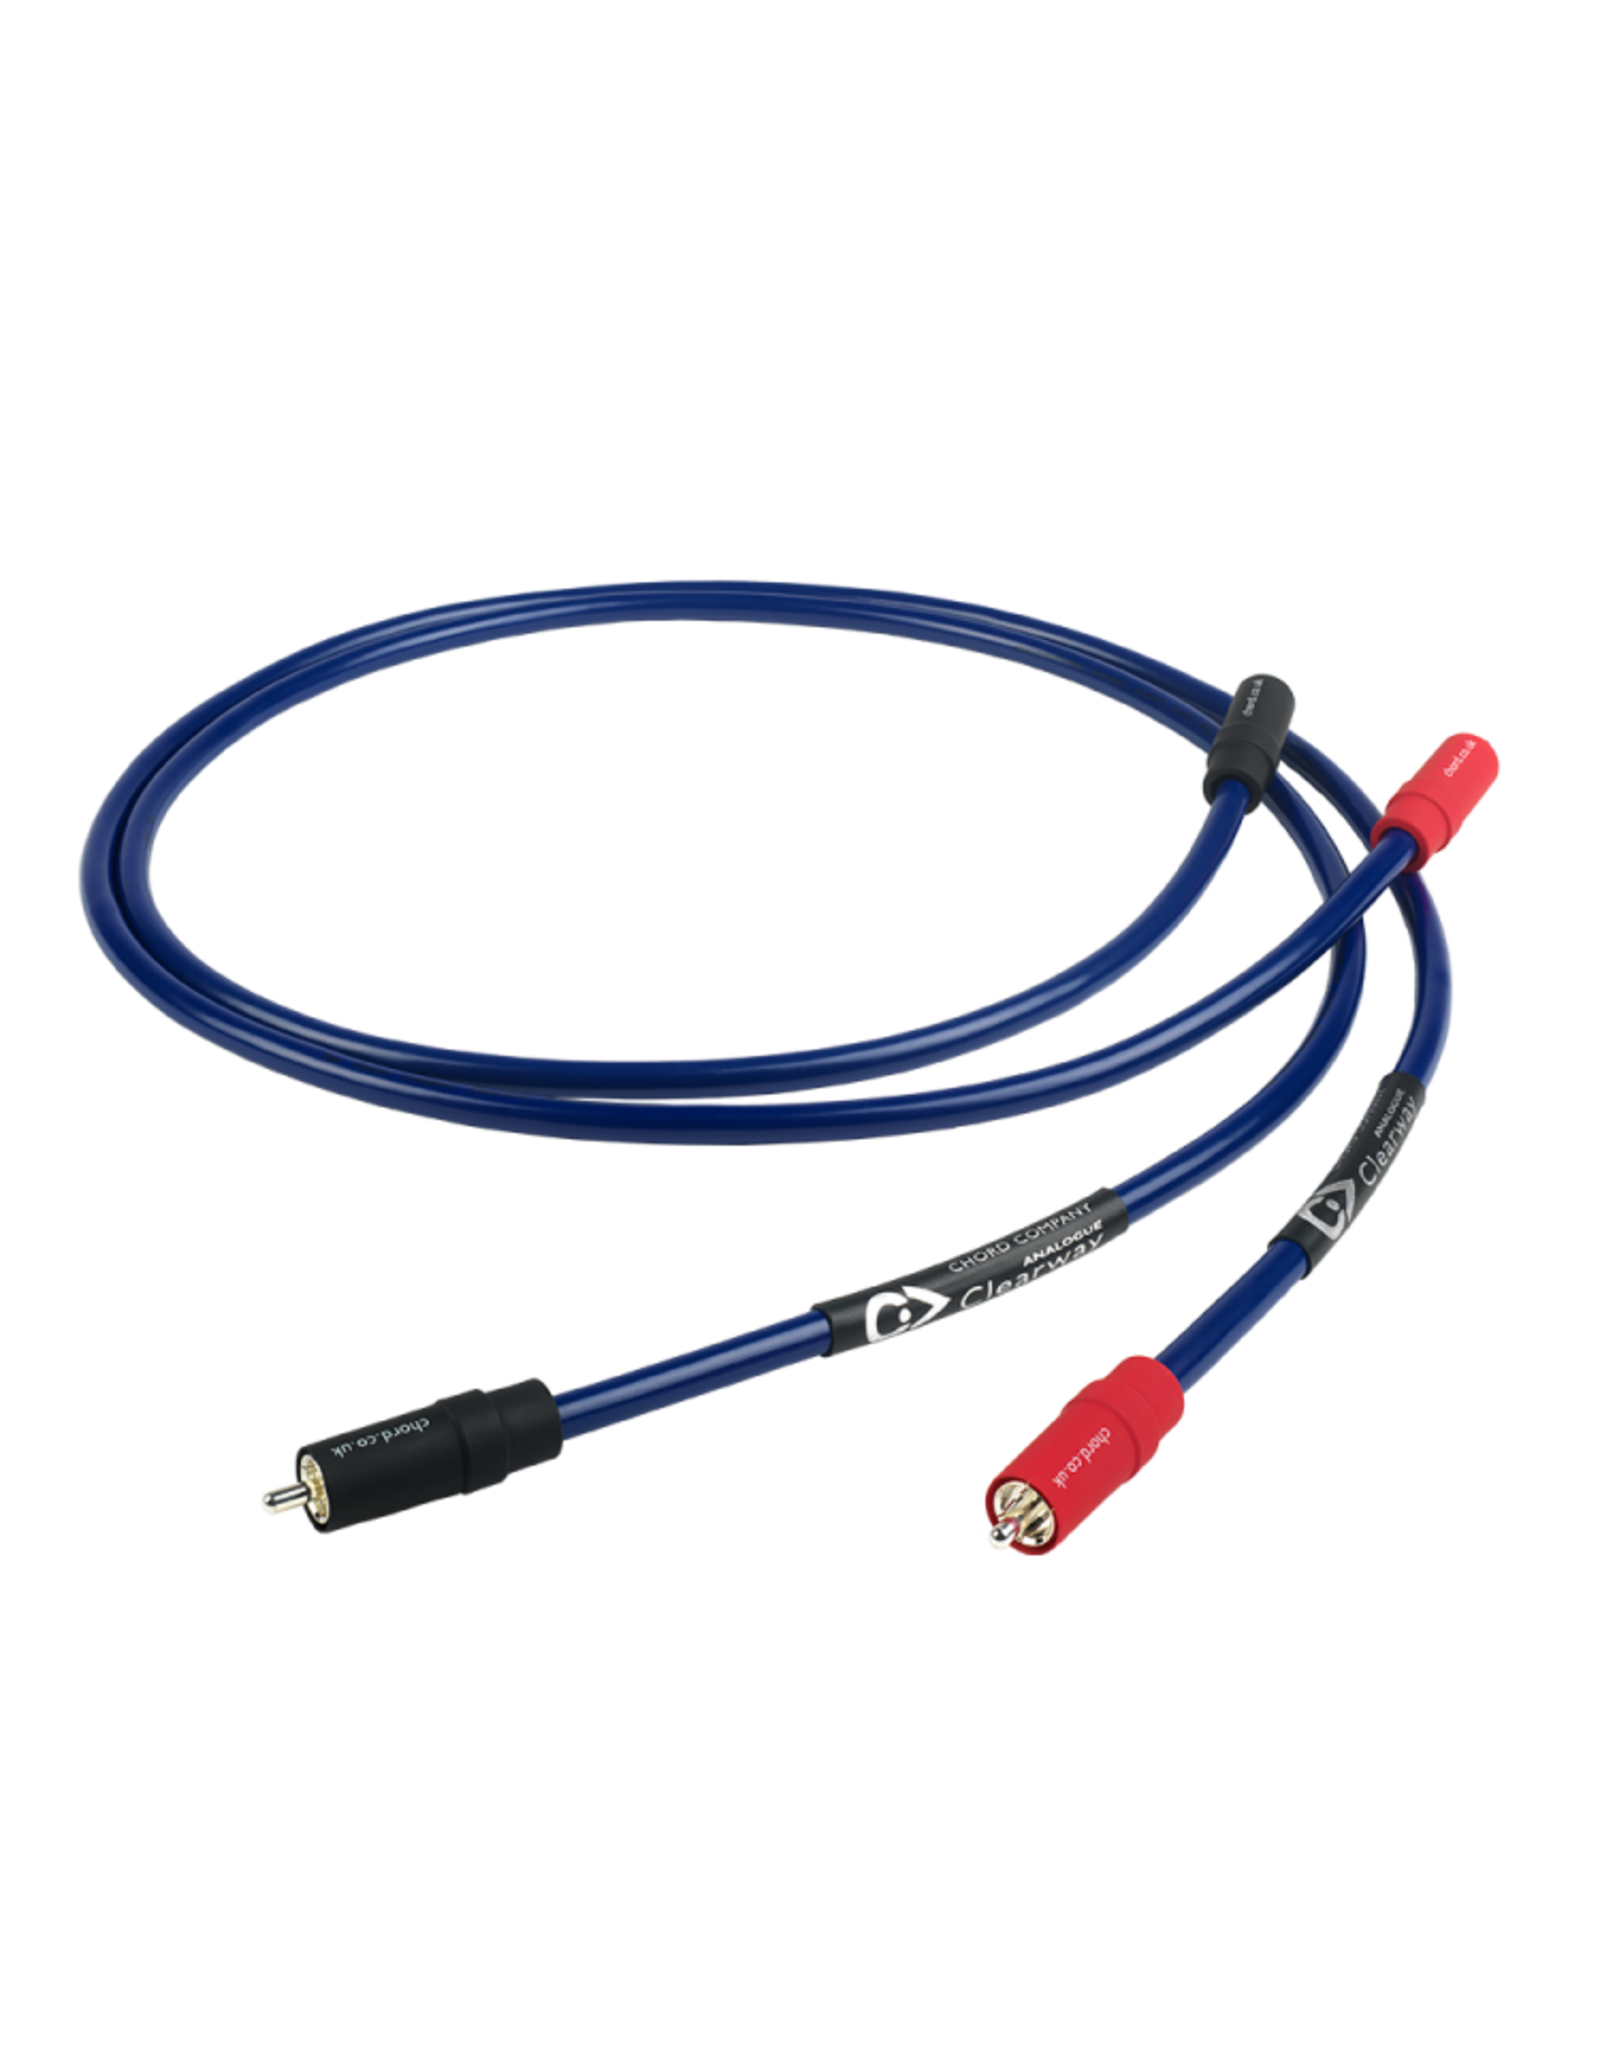 Chord Company Chord Clearway Analog RCA Cable